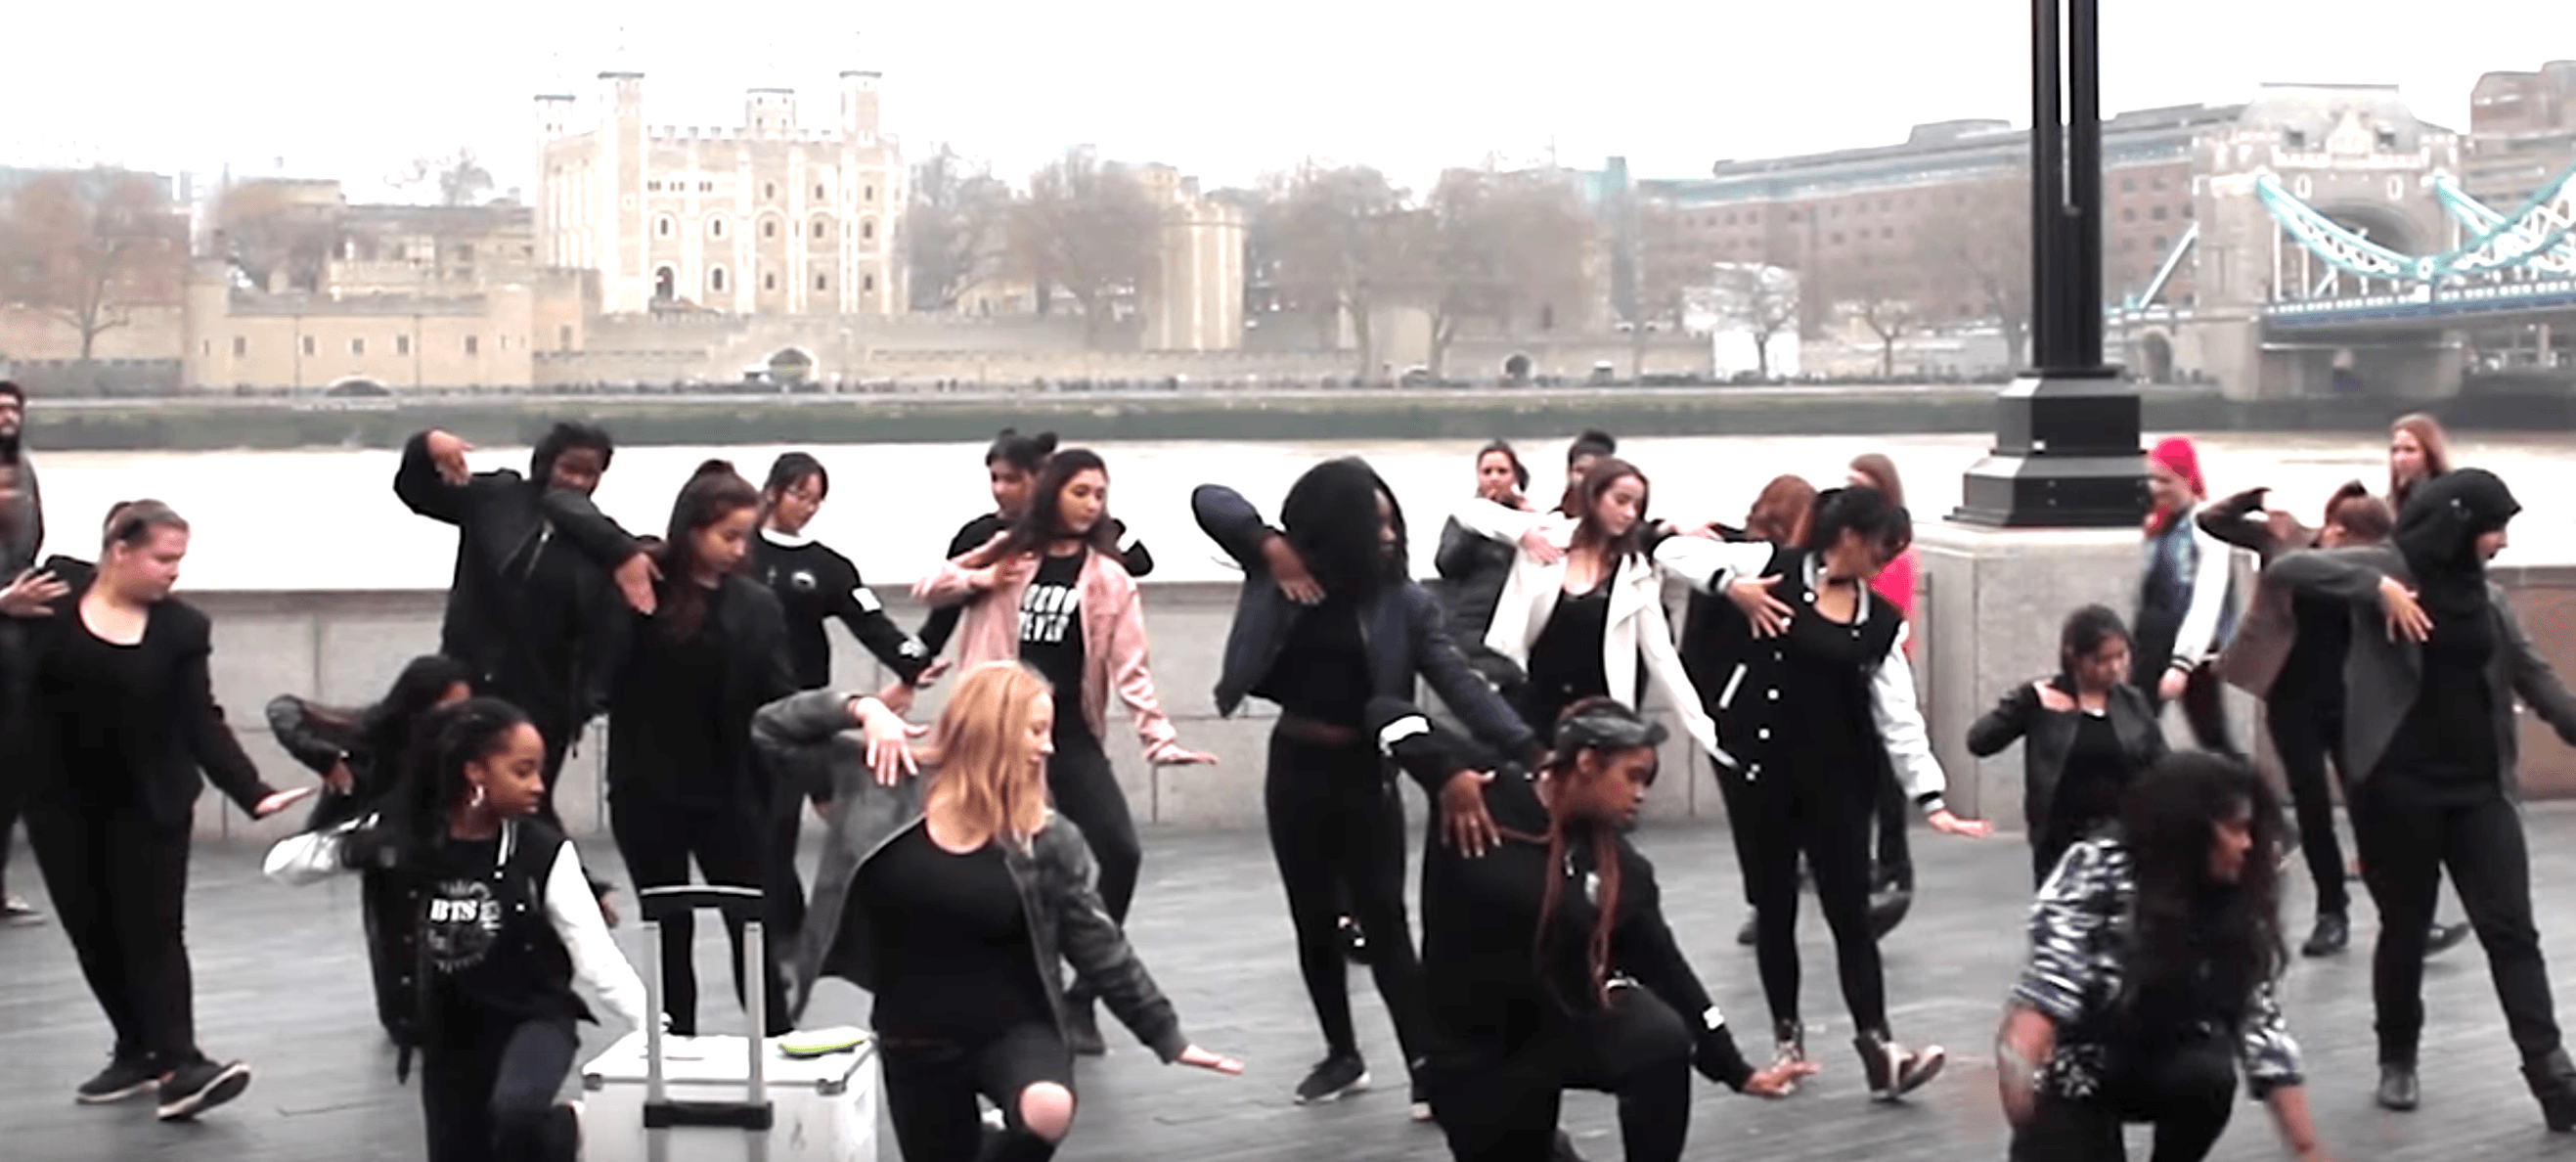 Amazing BTS flash mob takes over streets of London — Koreaboo